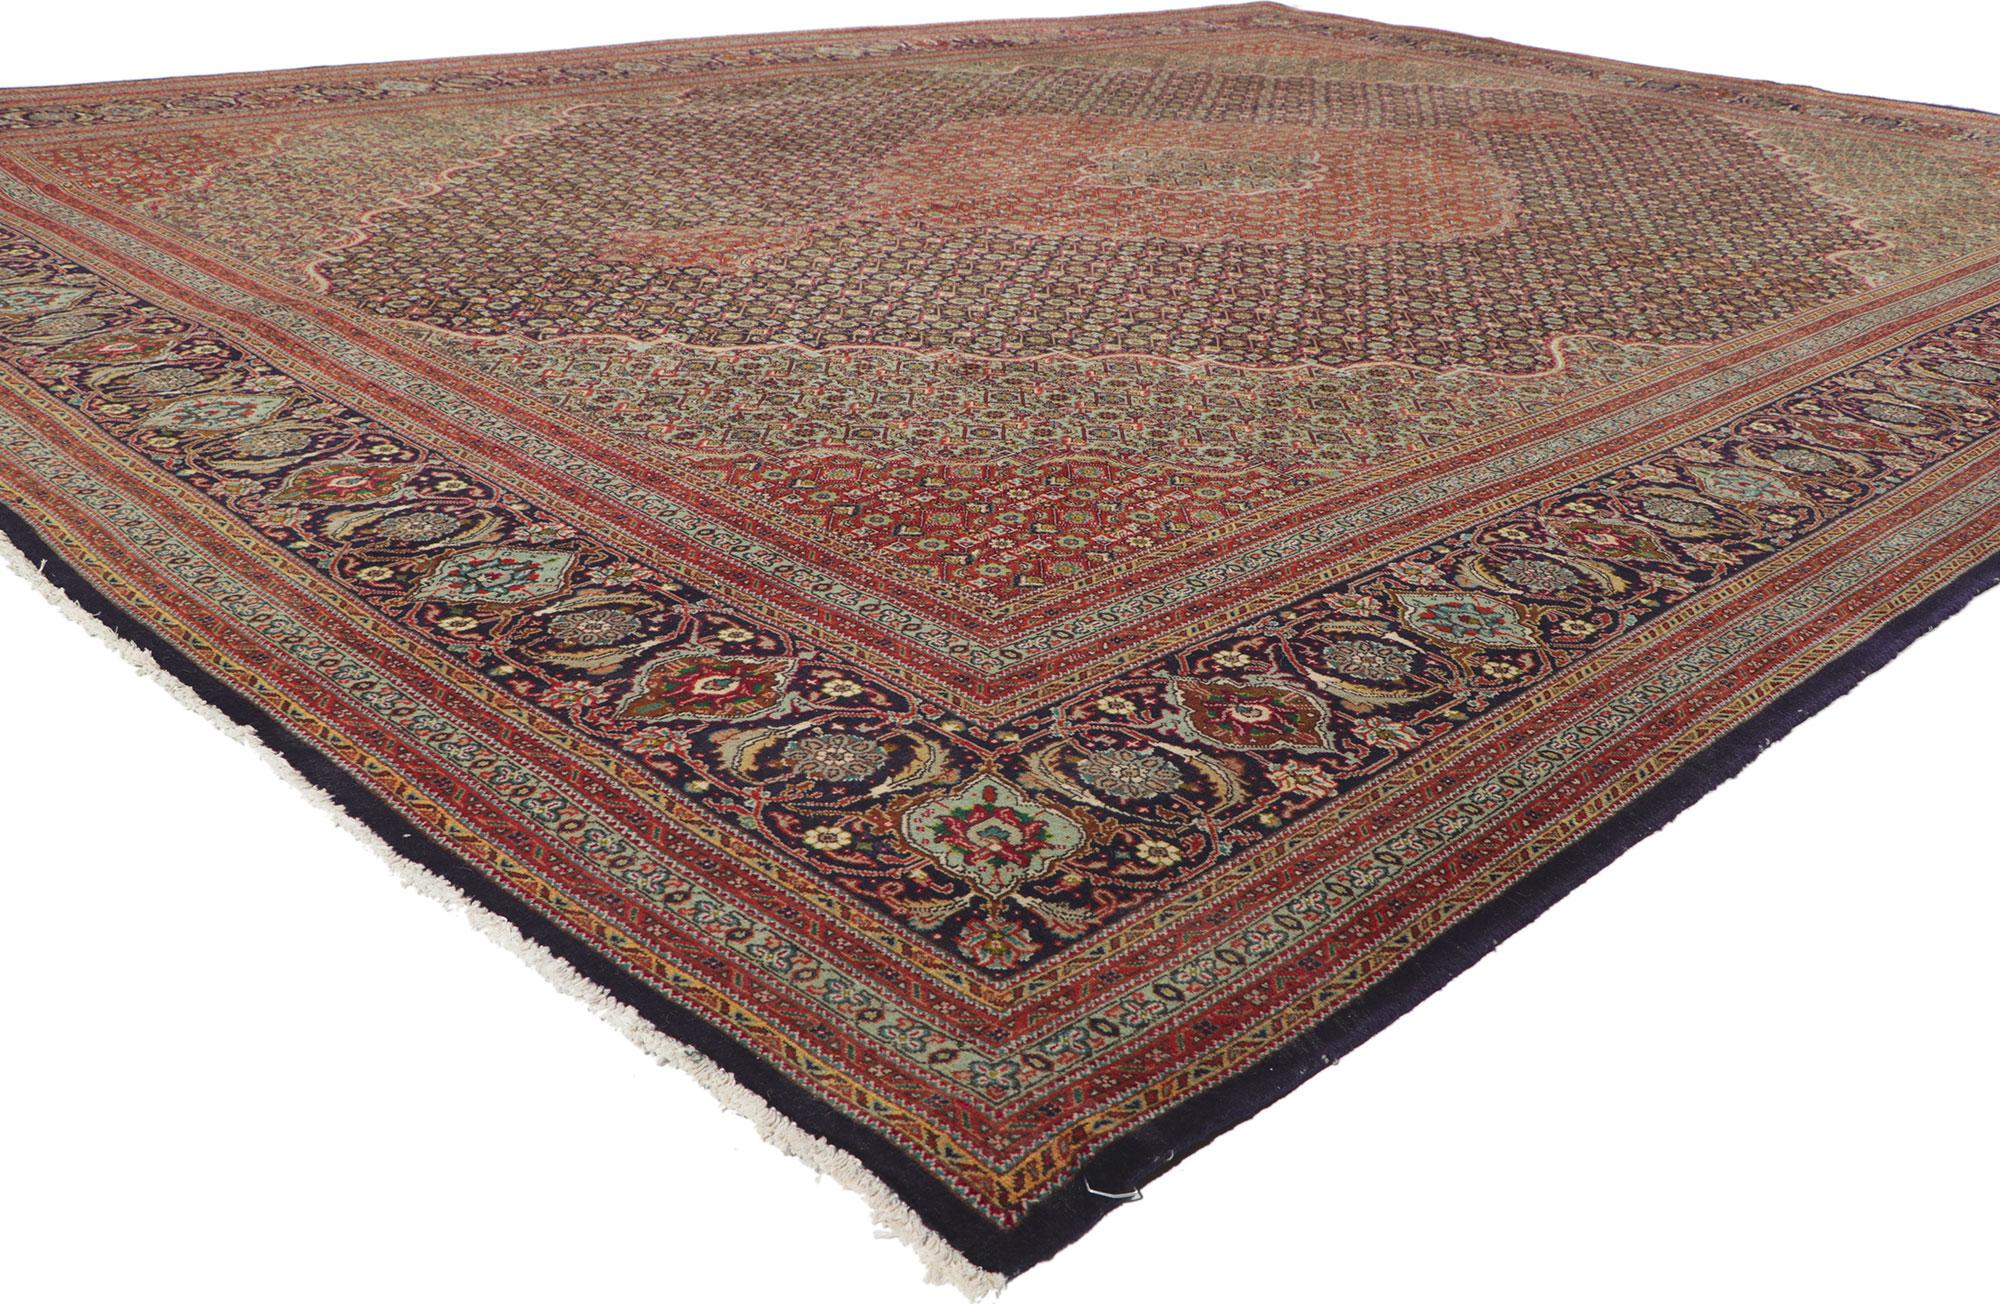 60998 vintage Persian Tabriz rug, 09'10 x 13'01.
?With its decorative detailing and well-balanced symmetry, this hand knotted wool vintage Persian Tabriz rug is a captivating vision of woven beauty. The renowned Fish-Mahi design and sophisticated